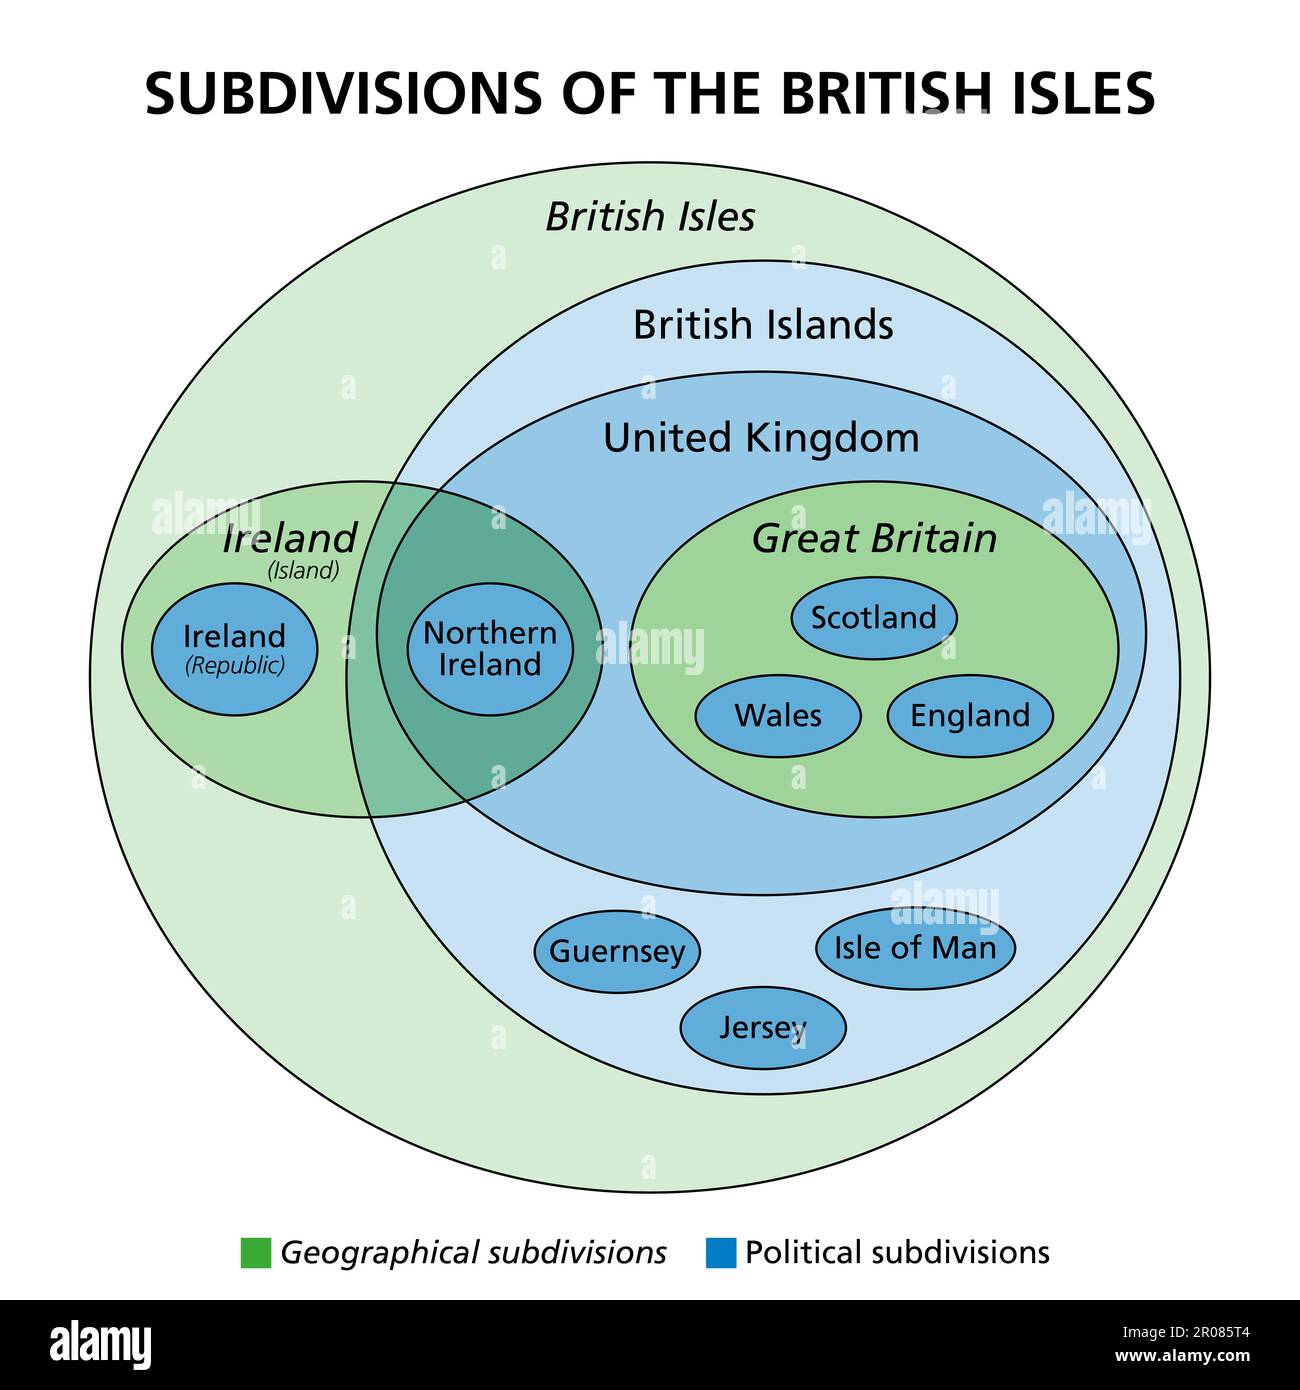 Subdivisions of the British Isles, Euler diagram. Geographical (green) and political (blue) subdivisions, with sovereign states Ireland and the UK. Stock Photo